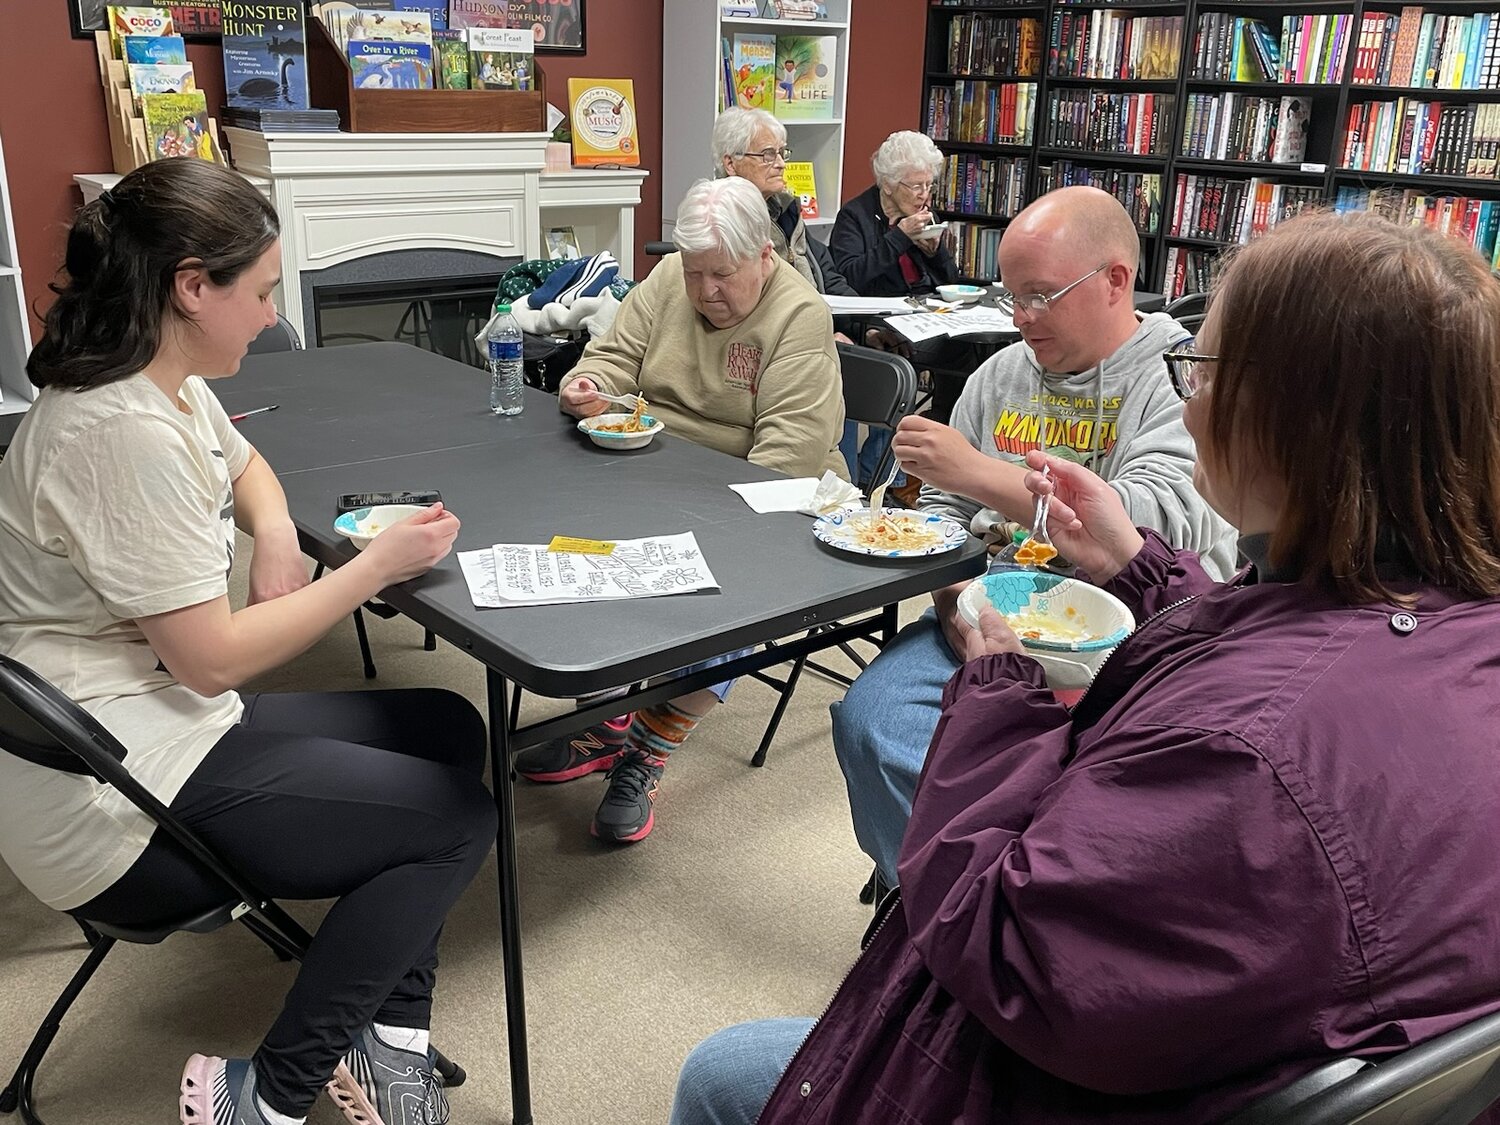 Julie Whittemore, left, owner of Keaton & Lloyd Bookshop, 238 W. Dominick St., tries some noodles with shop customers on Saturday.